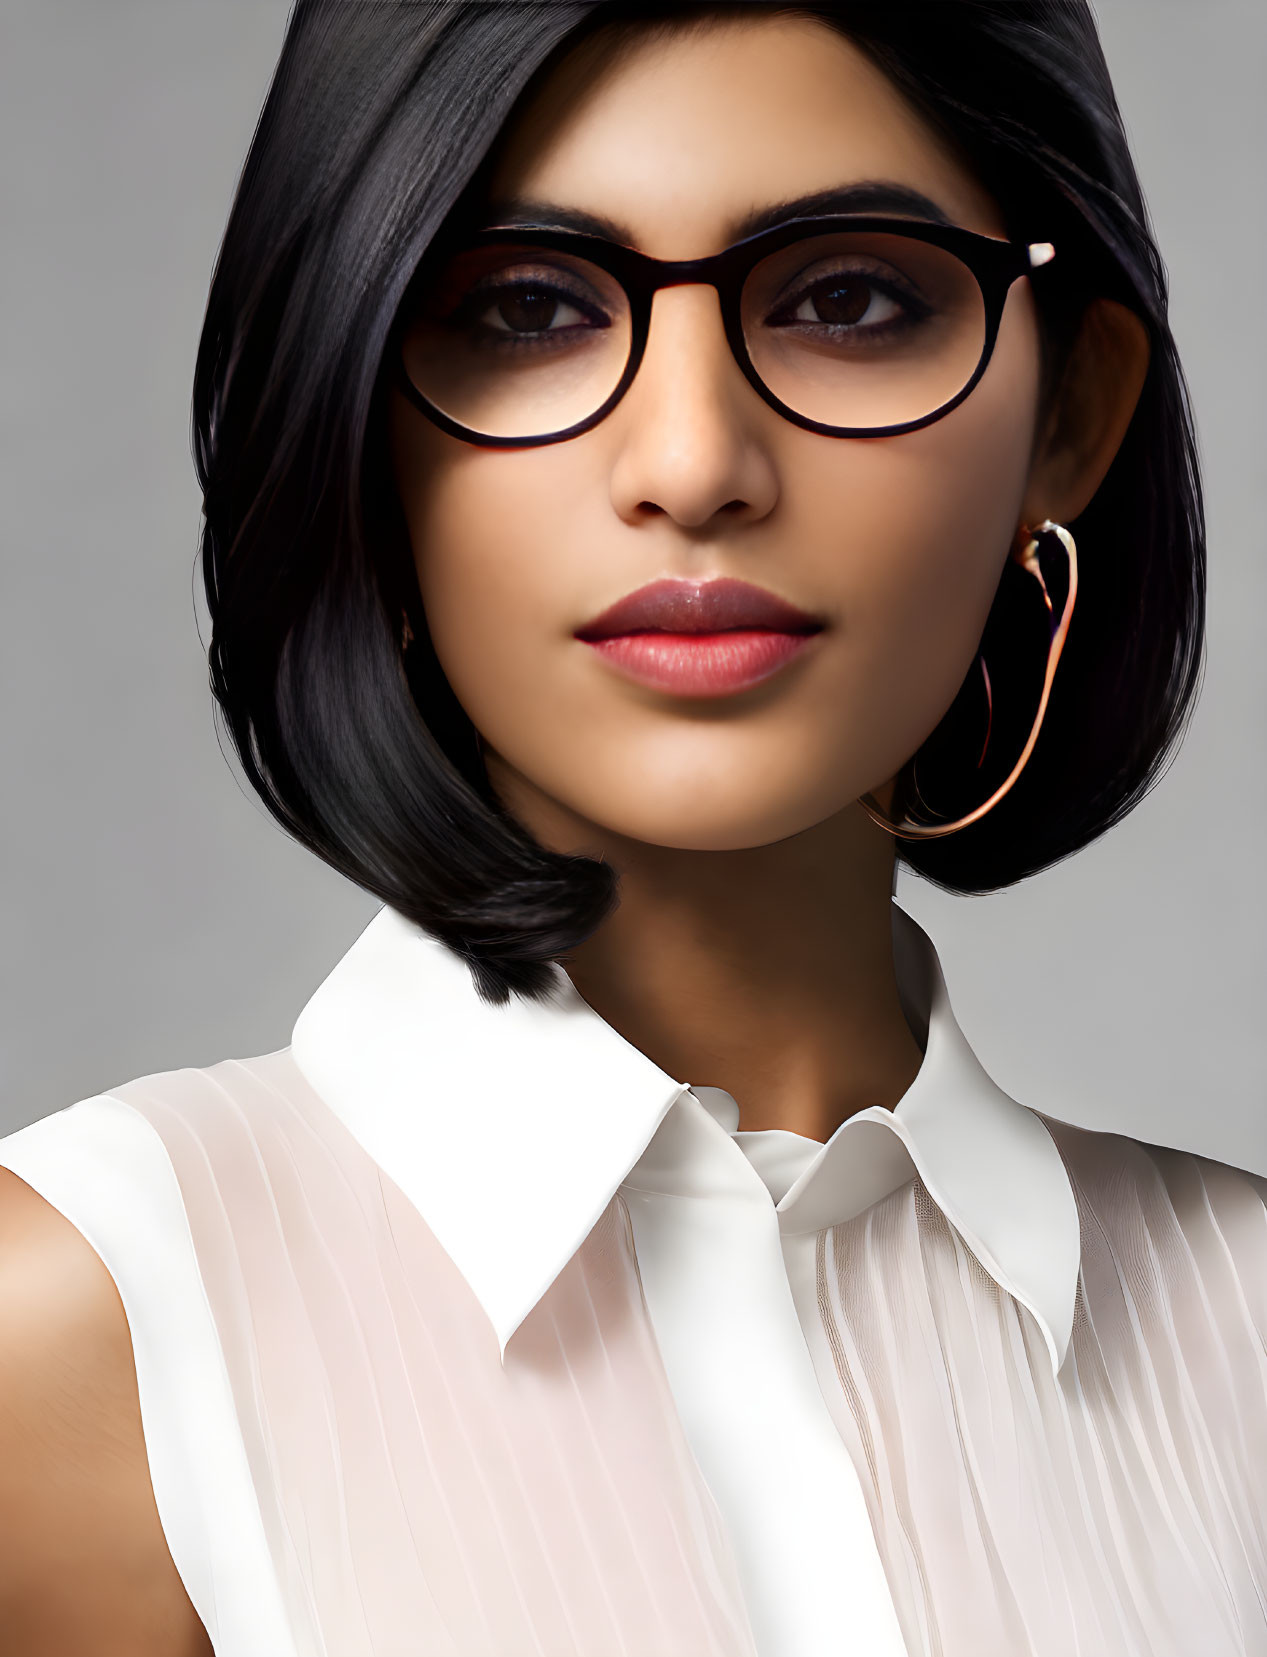 Woman with Bob-Cut Hair in Black Glasses and White Blouse